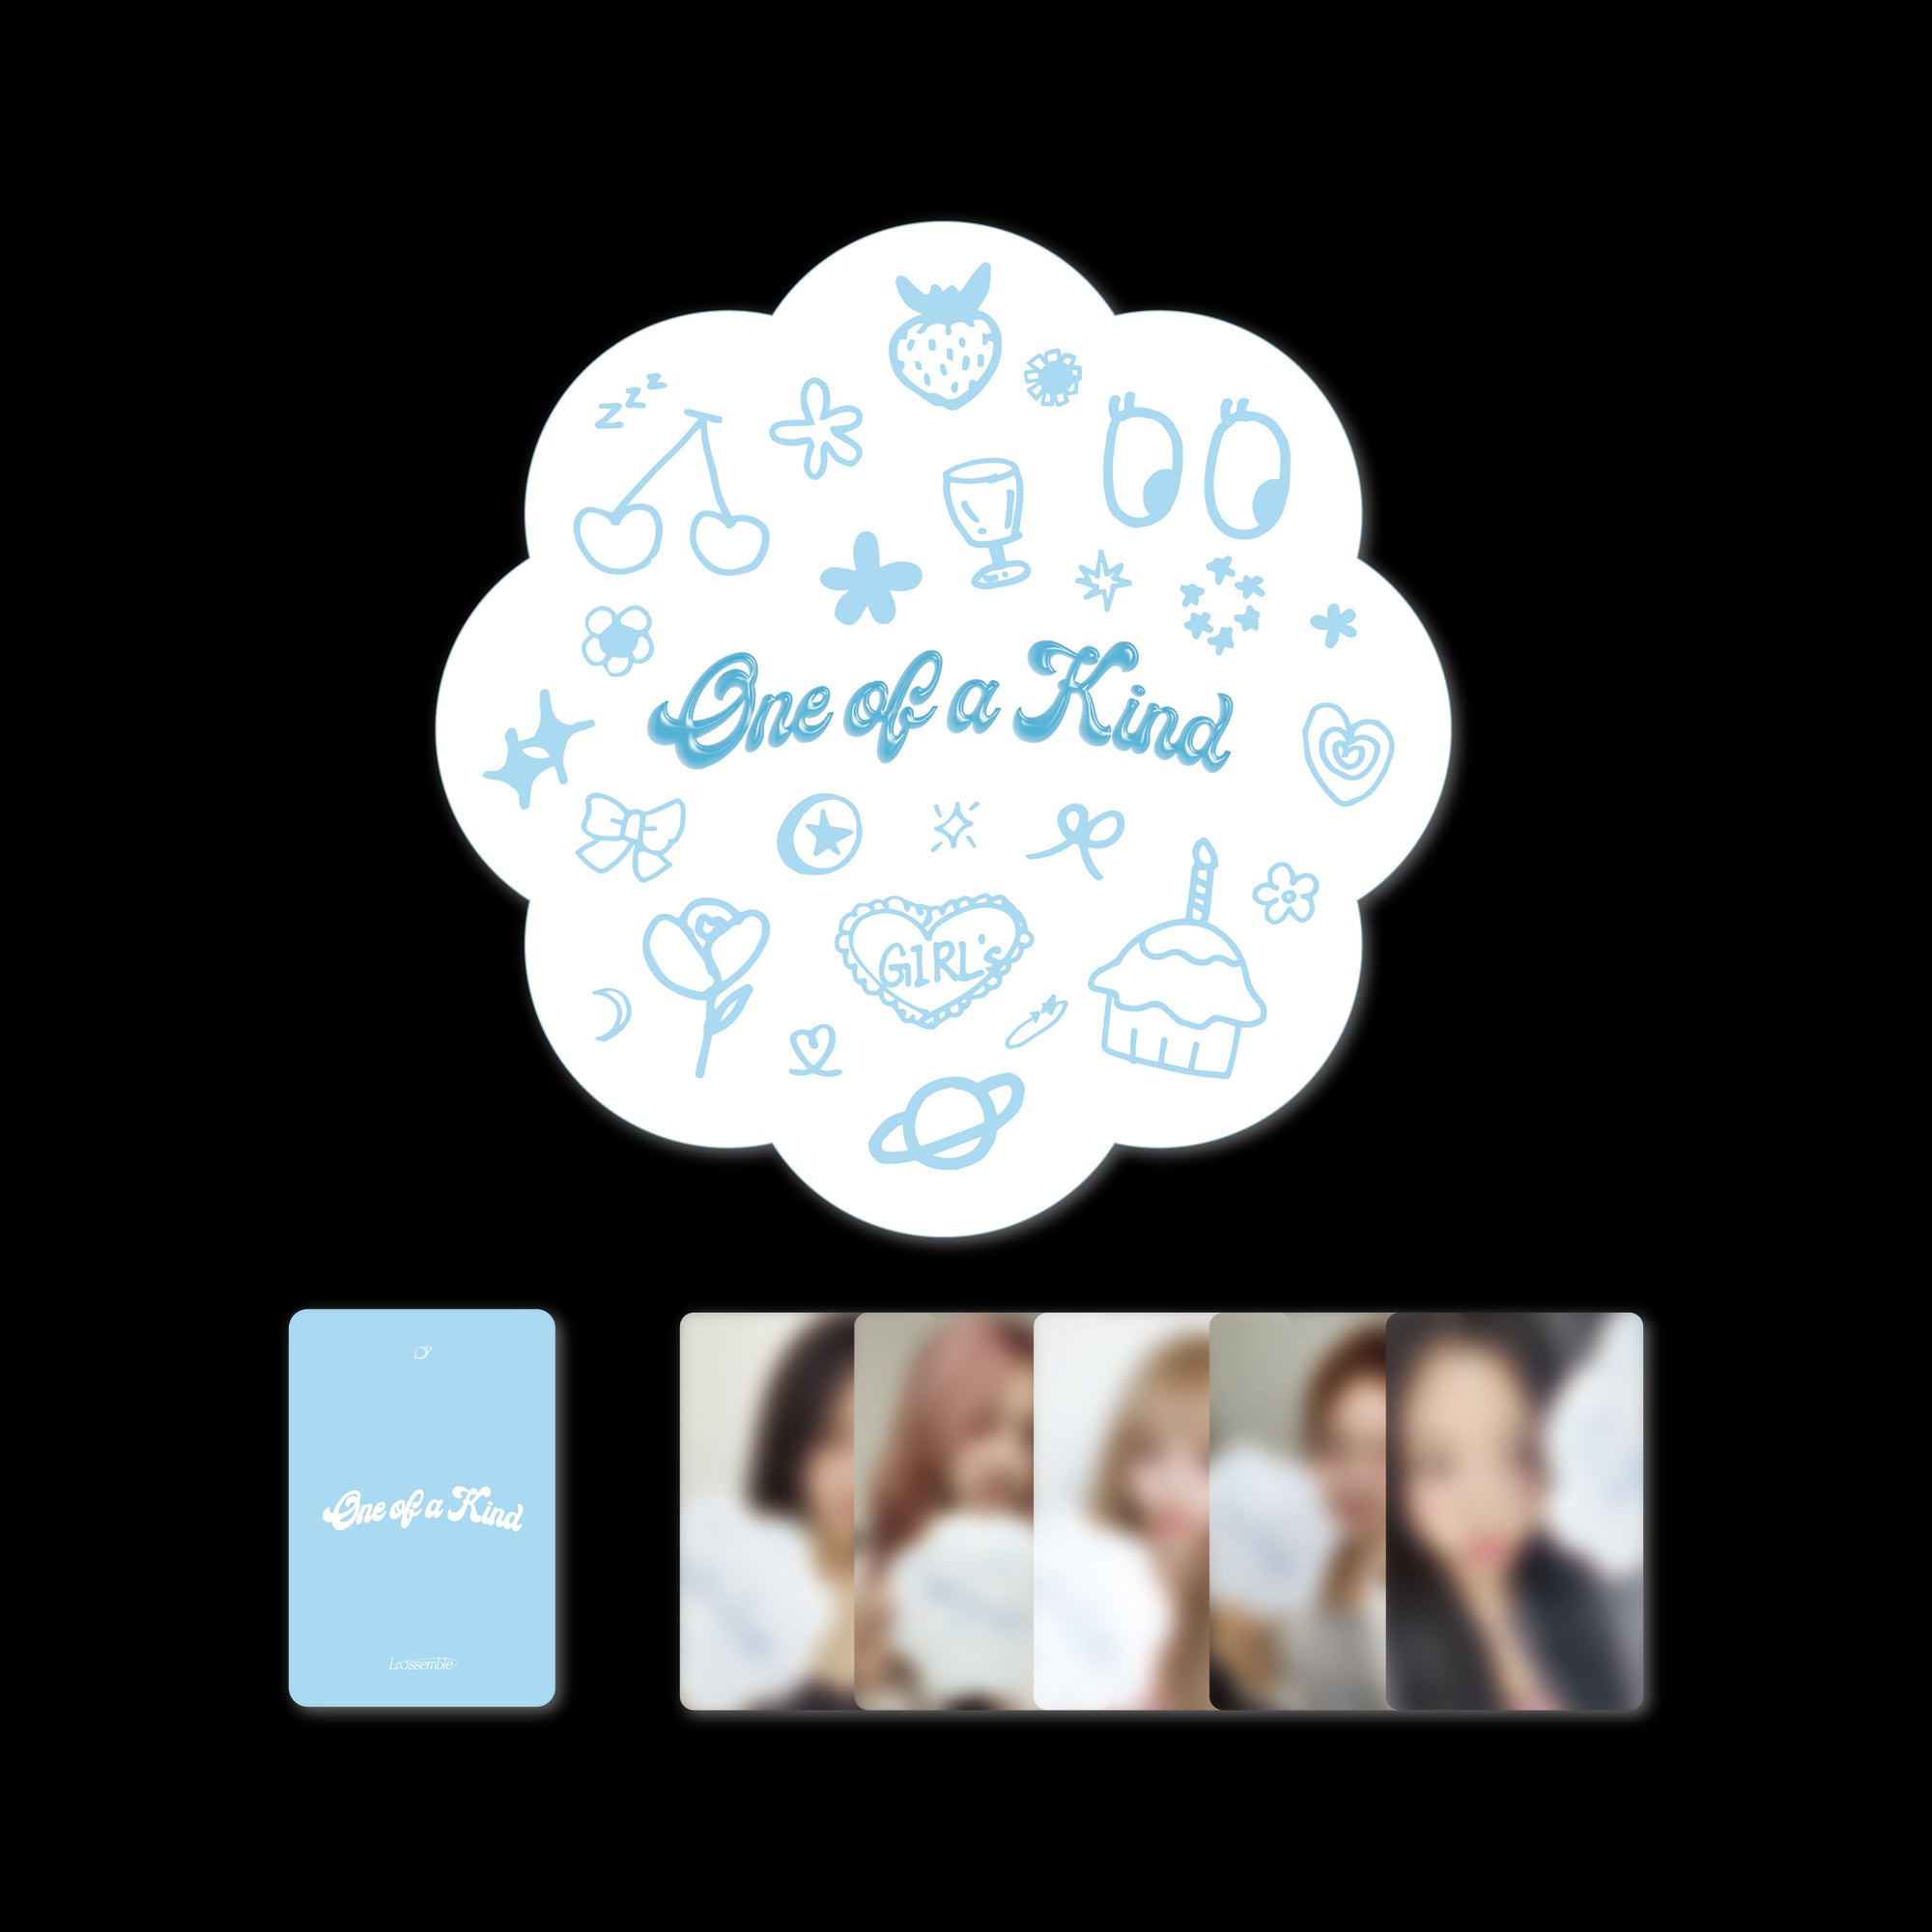 [2ND PRE-ORDER] LOOSSEMBLE - ONE OF A KIND 2ND MINI ALBUM OFFICIAL MD MOUSE PAD - COKODIVE